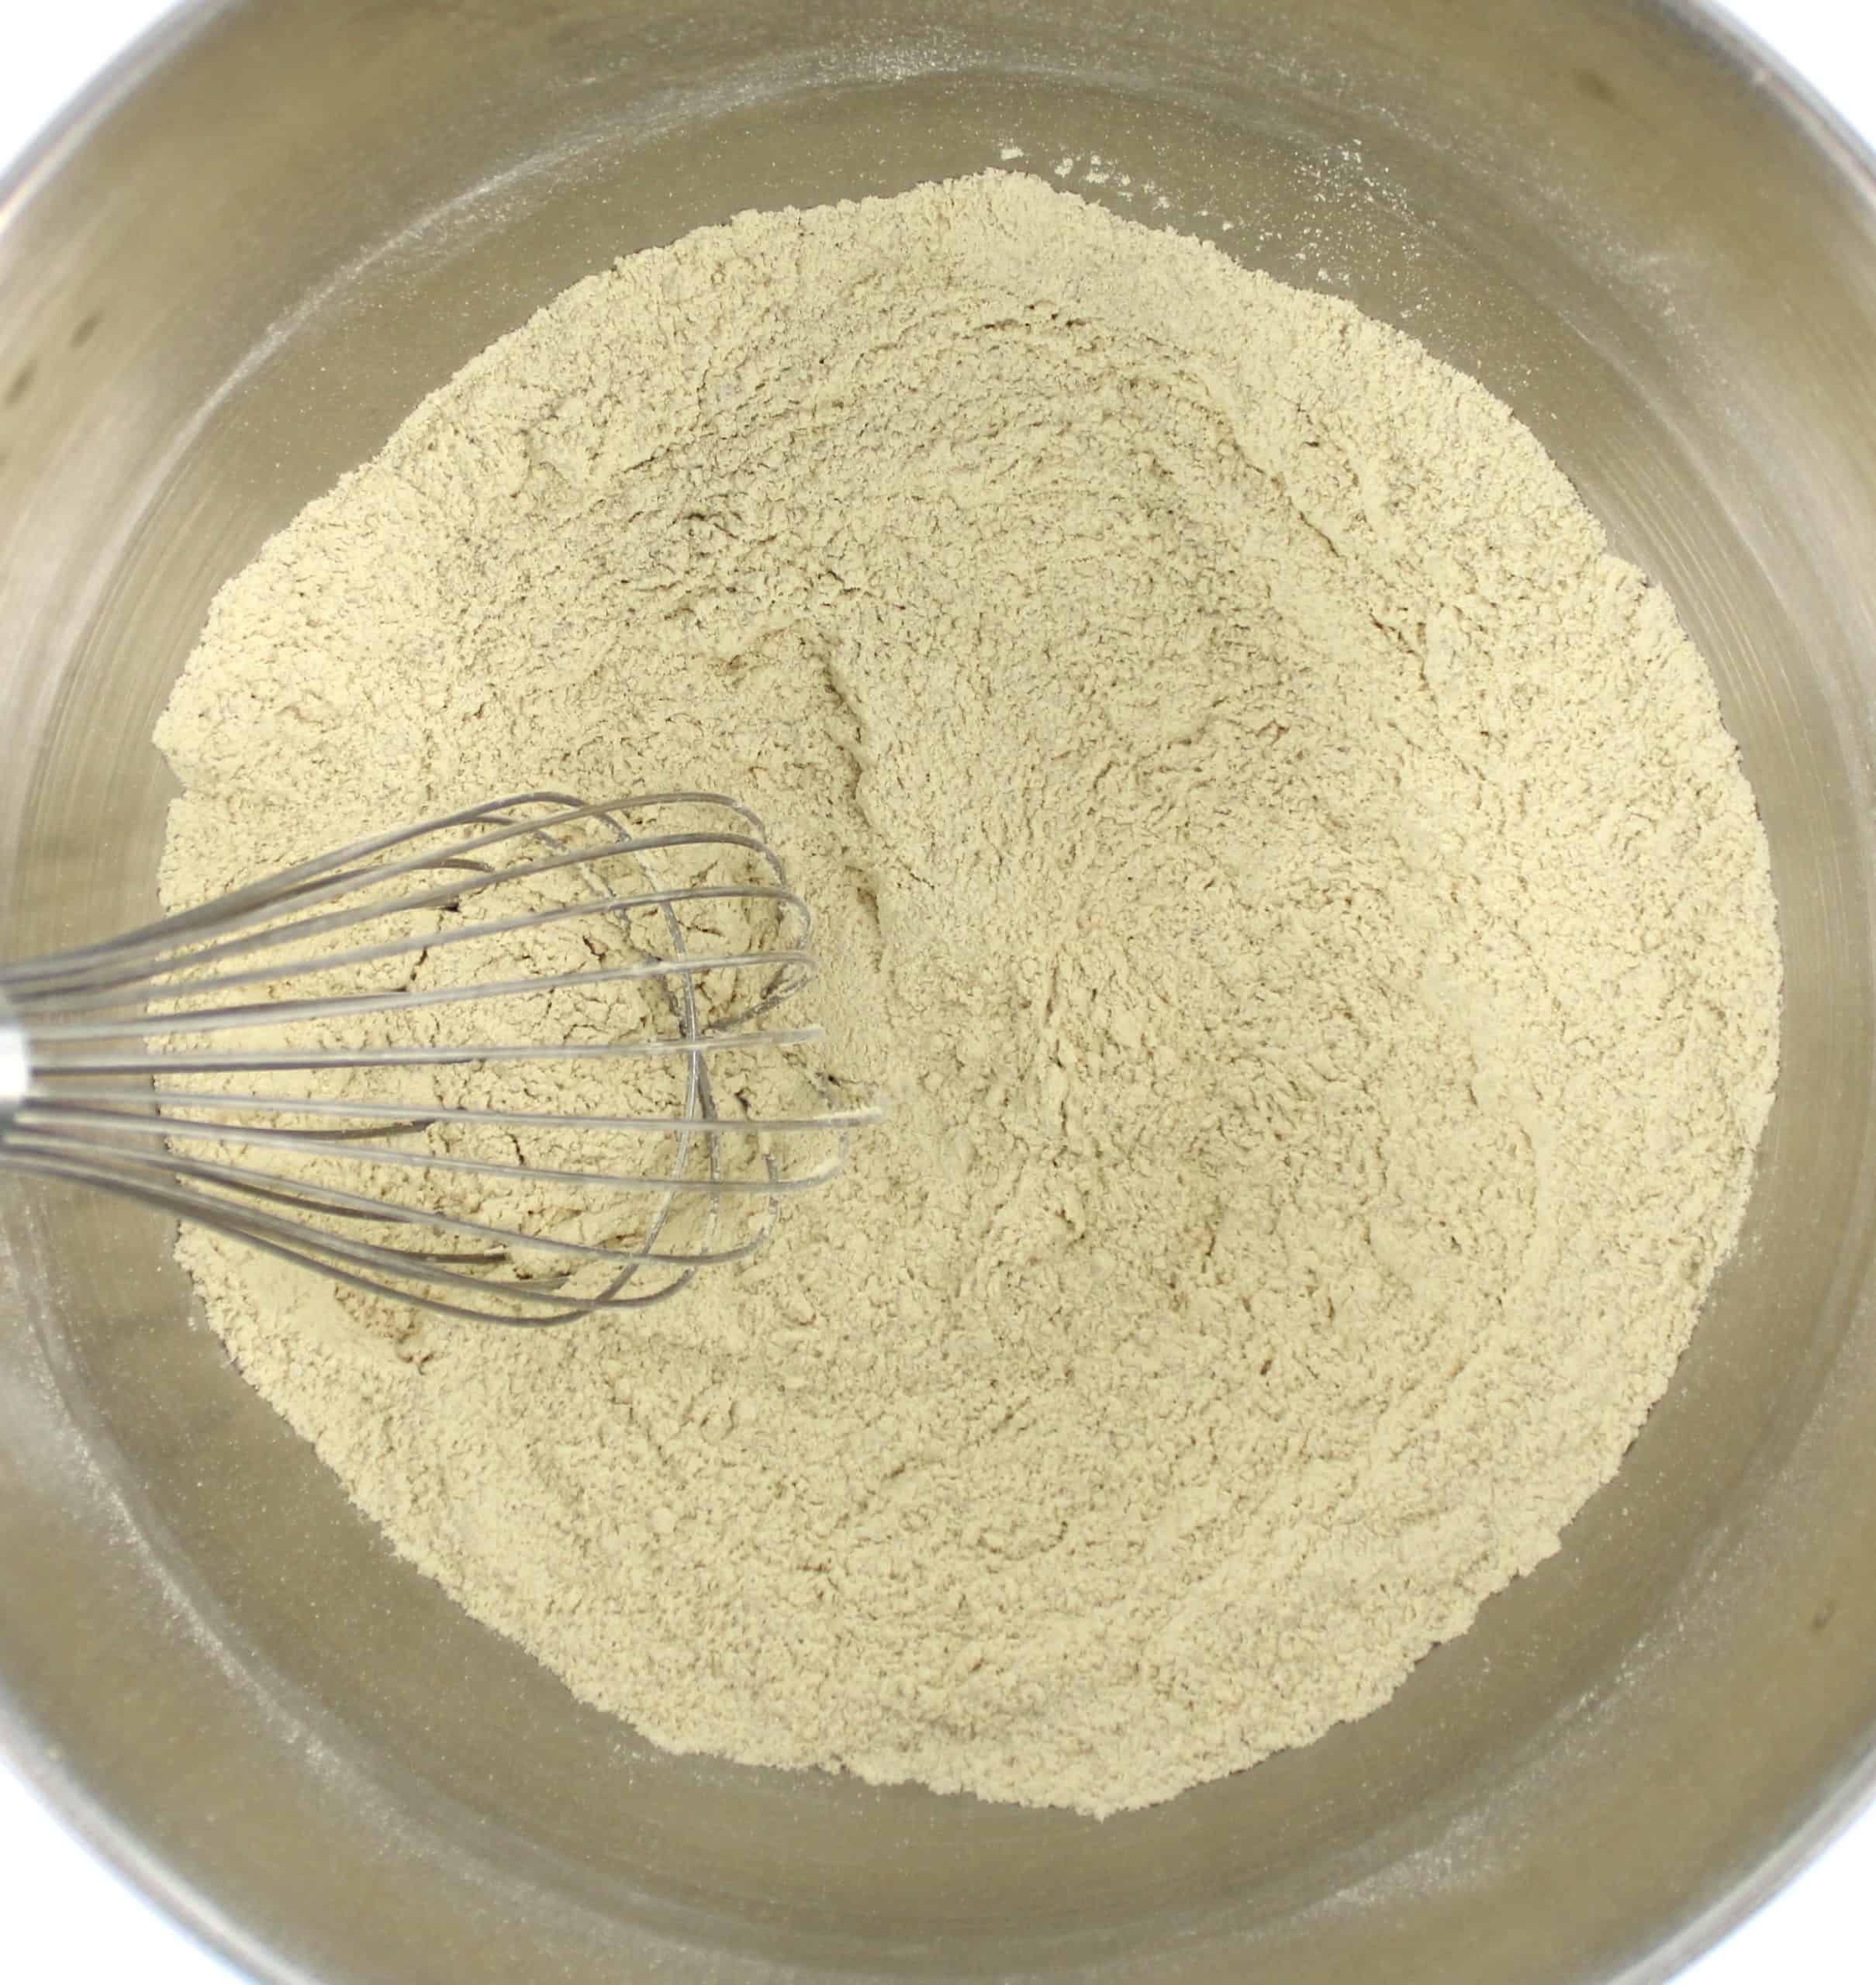 keto buns dry ingredients with whisk in mixer bowl